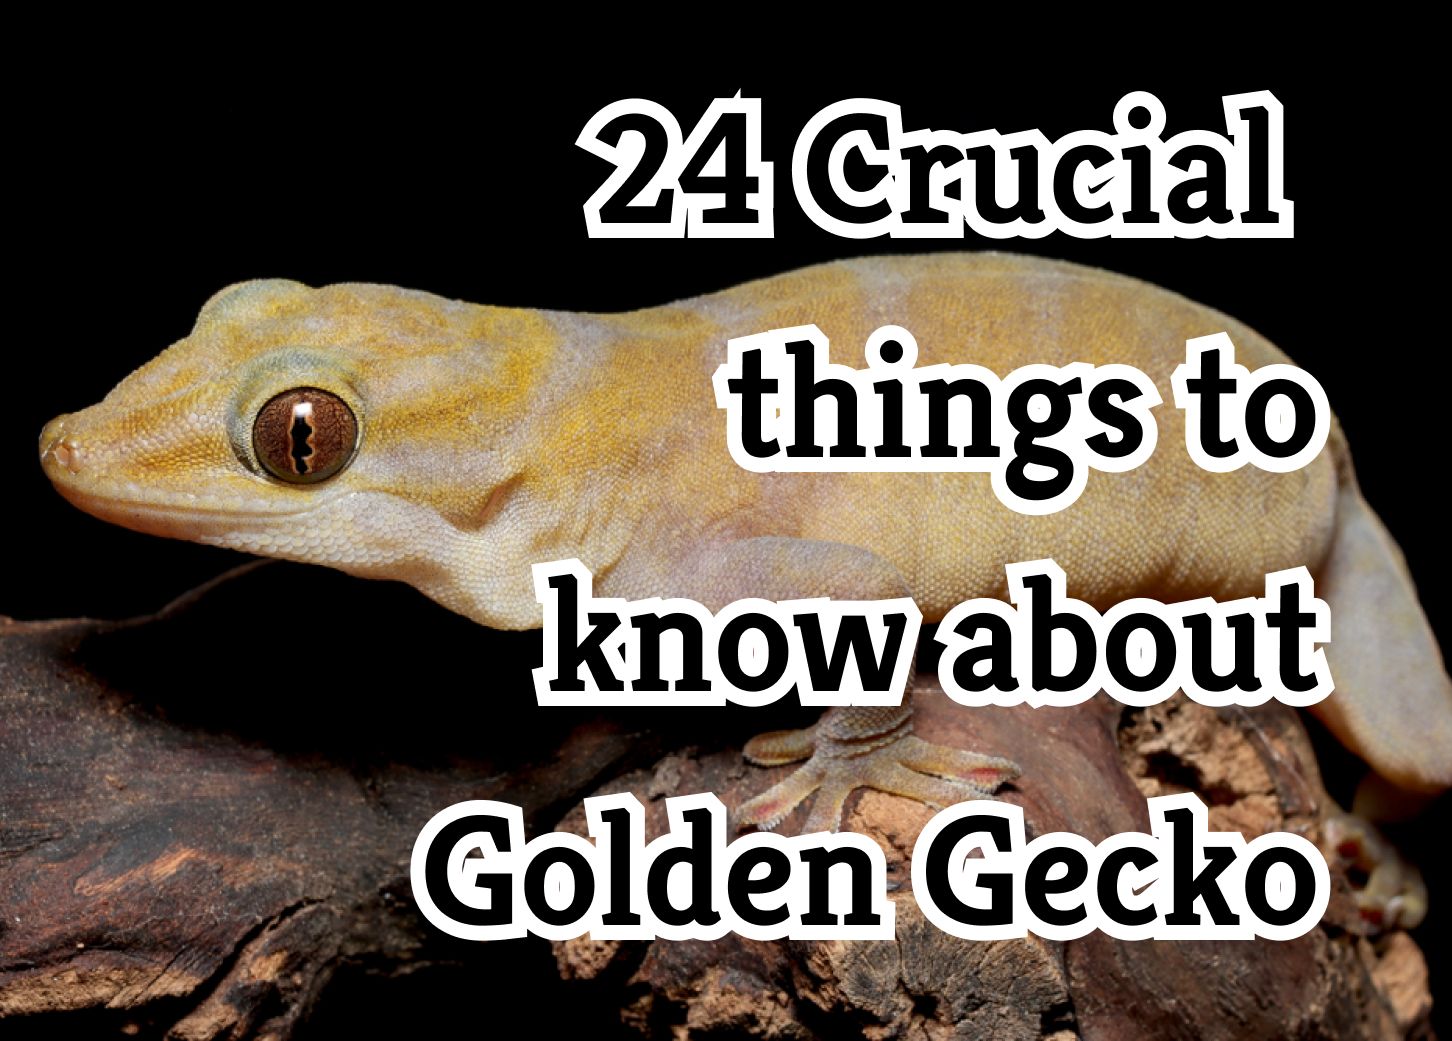 24 Crucial things to know about Golden Gecko